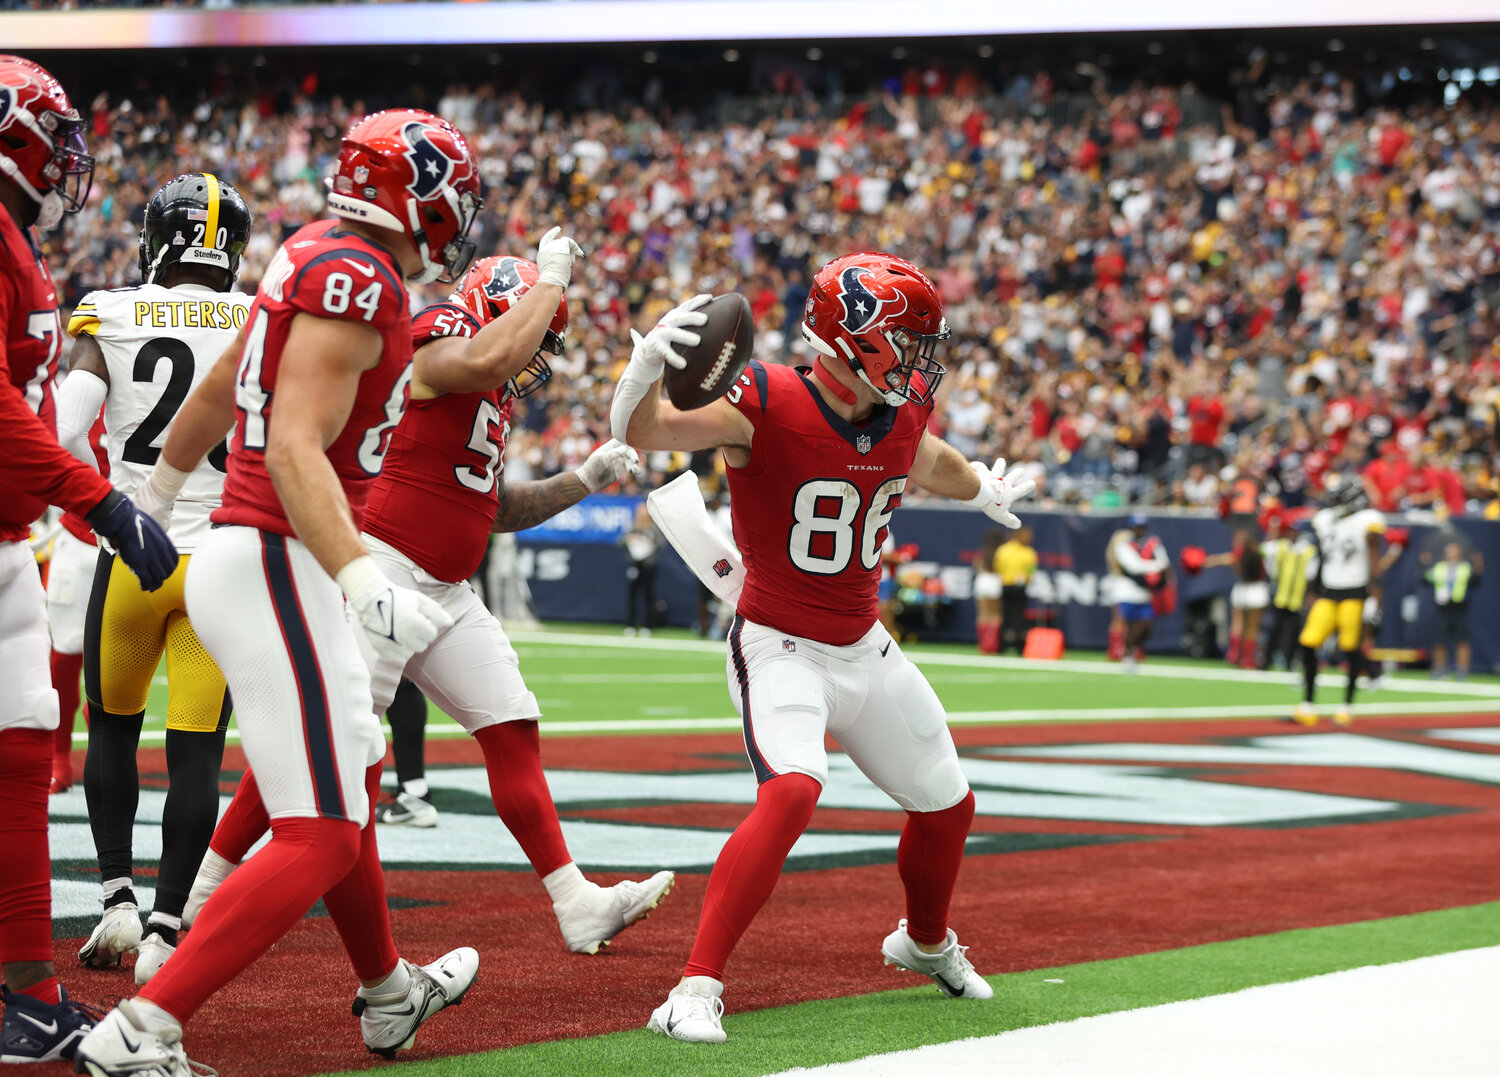 Texans tight end Dalton Schultz (86) celebrates after making a 6-yard touchdown pass during an NFL game between the Houston Texans and the Pittsburgh Steelers on October 1, 2023 in Houston.